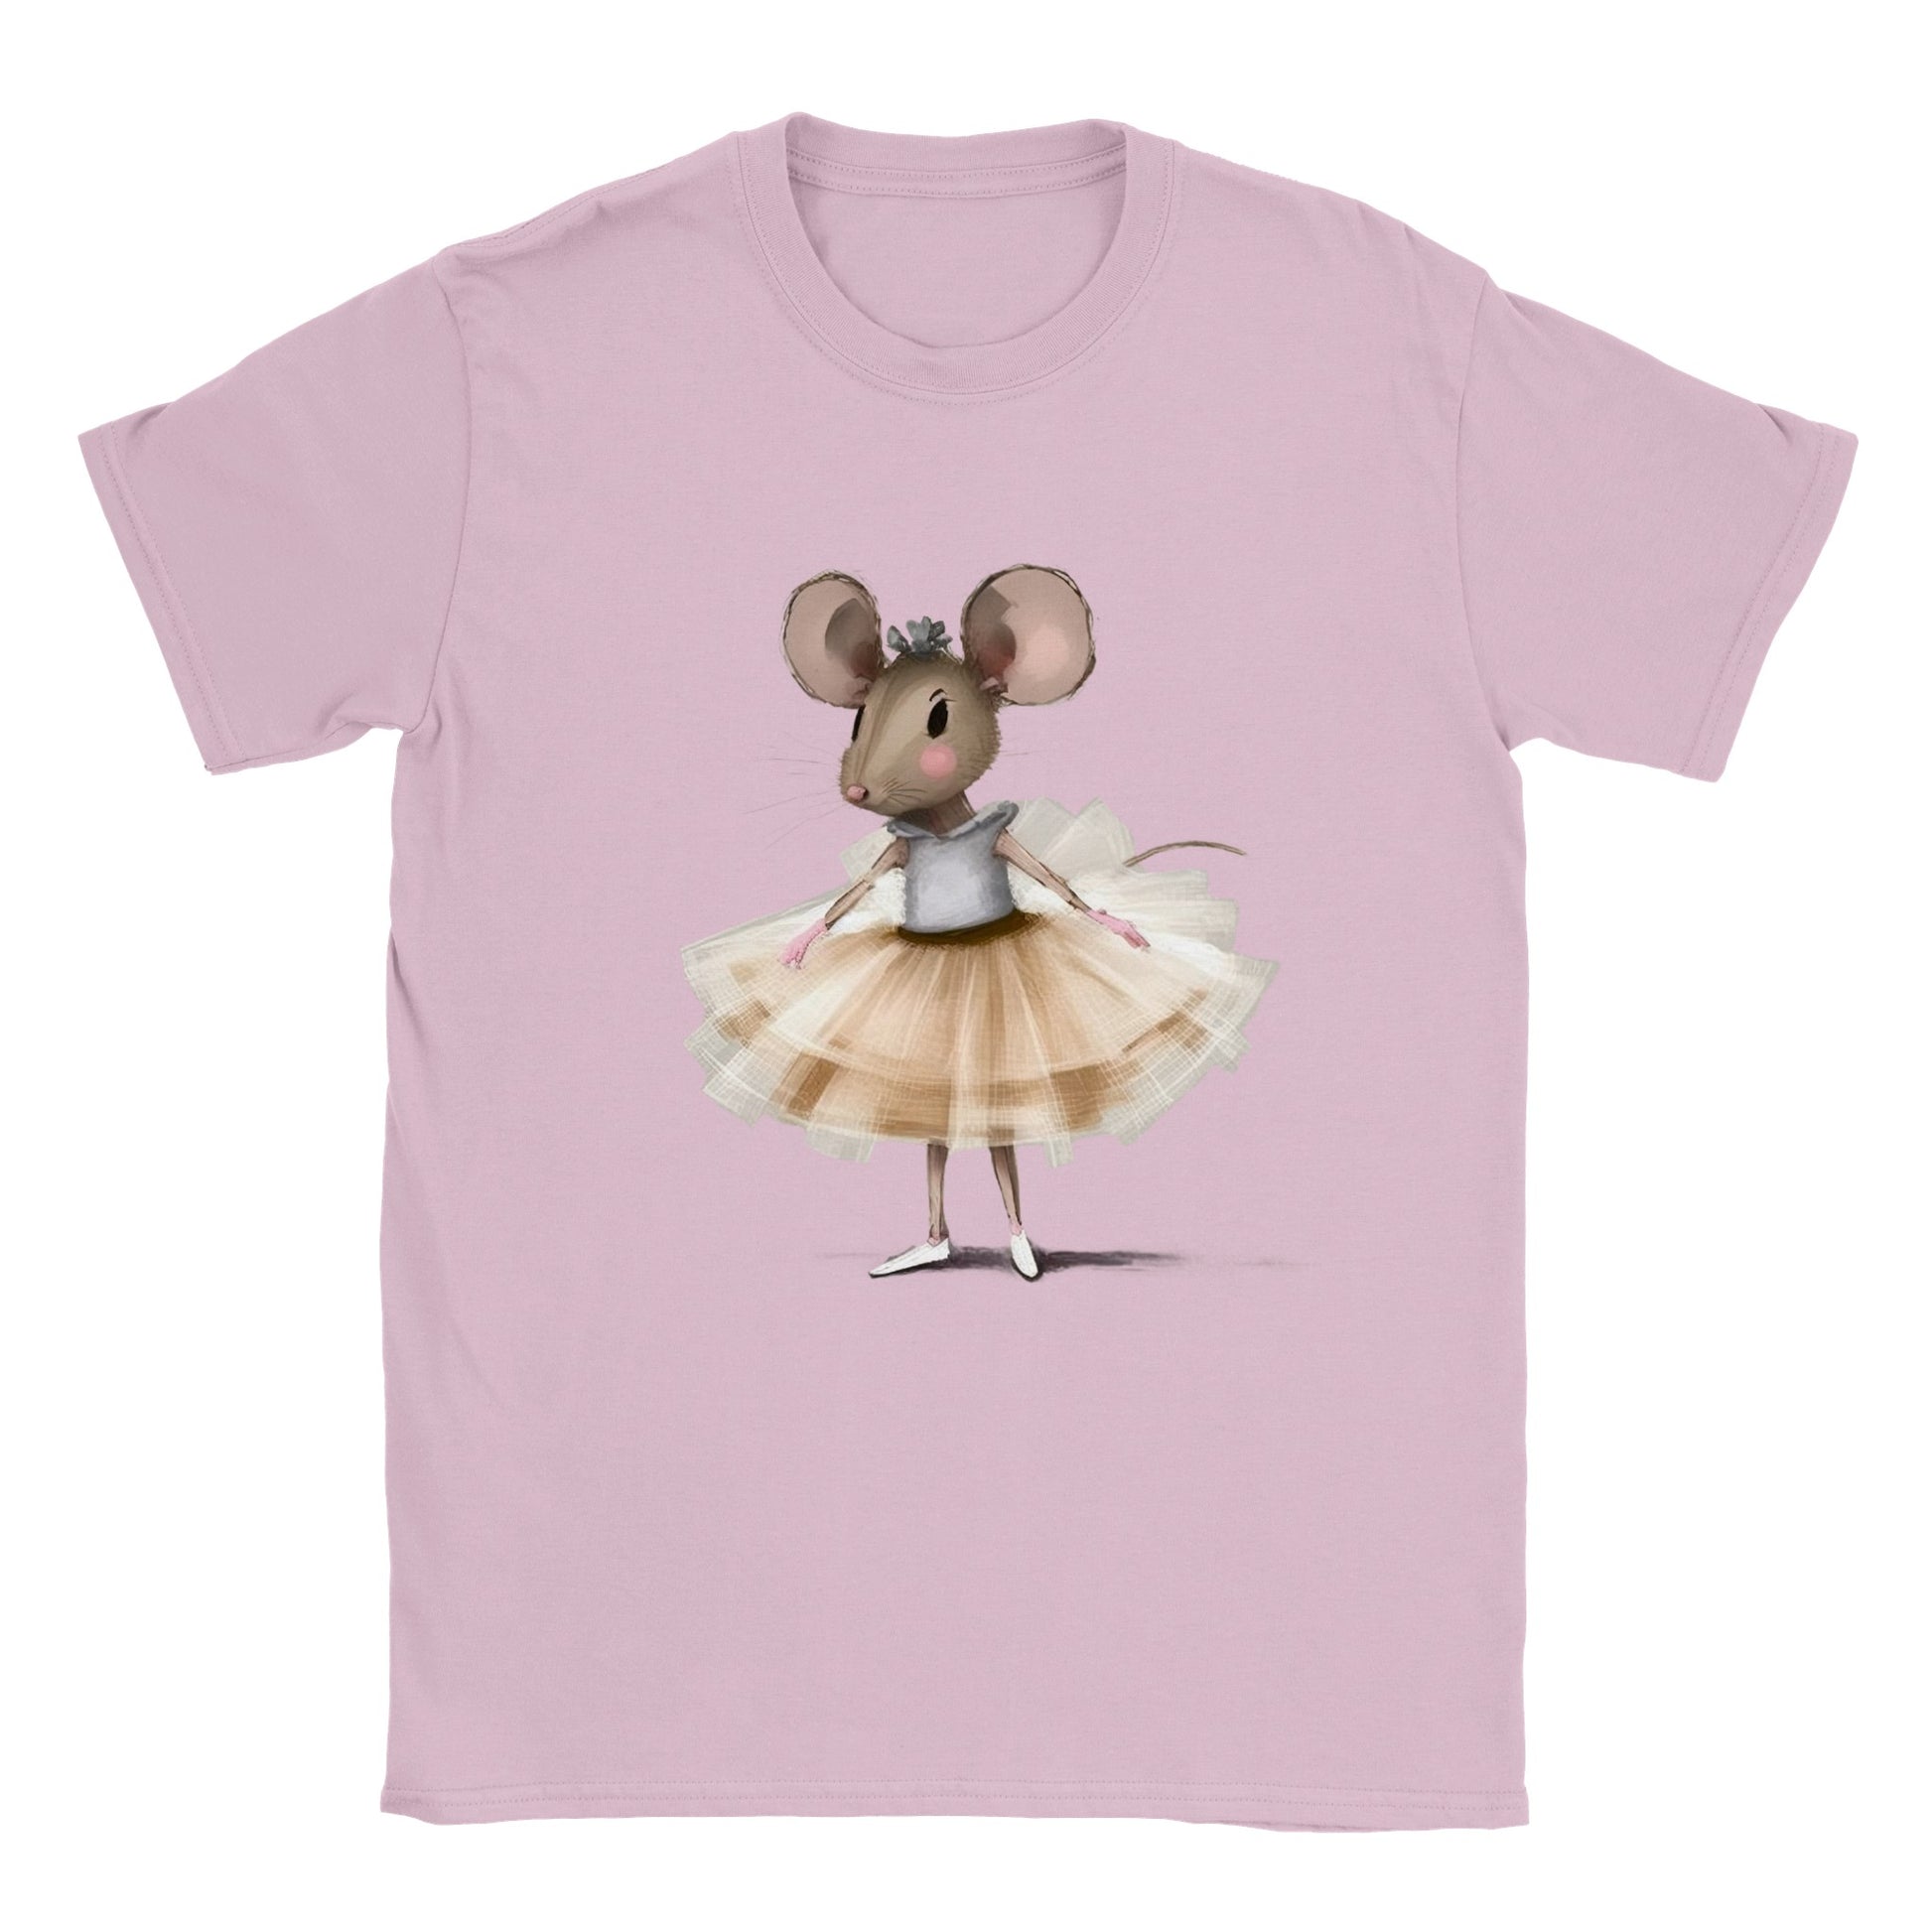 Kids pink t-shirt with a cute ballerina mouse print